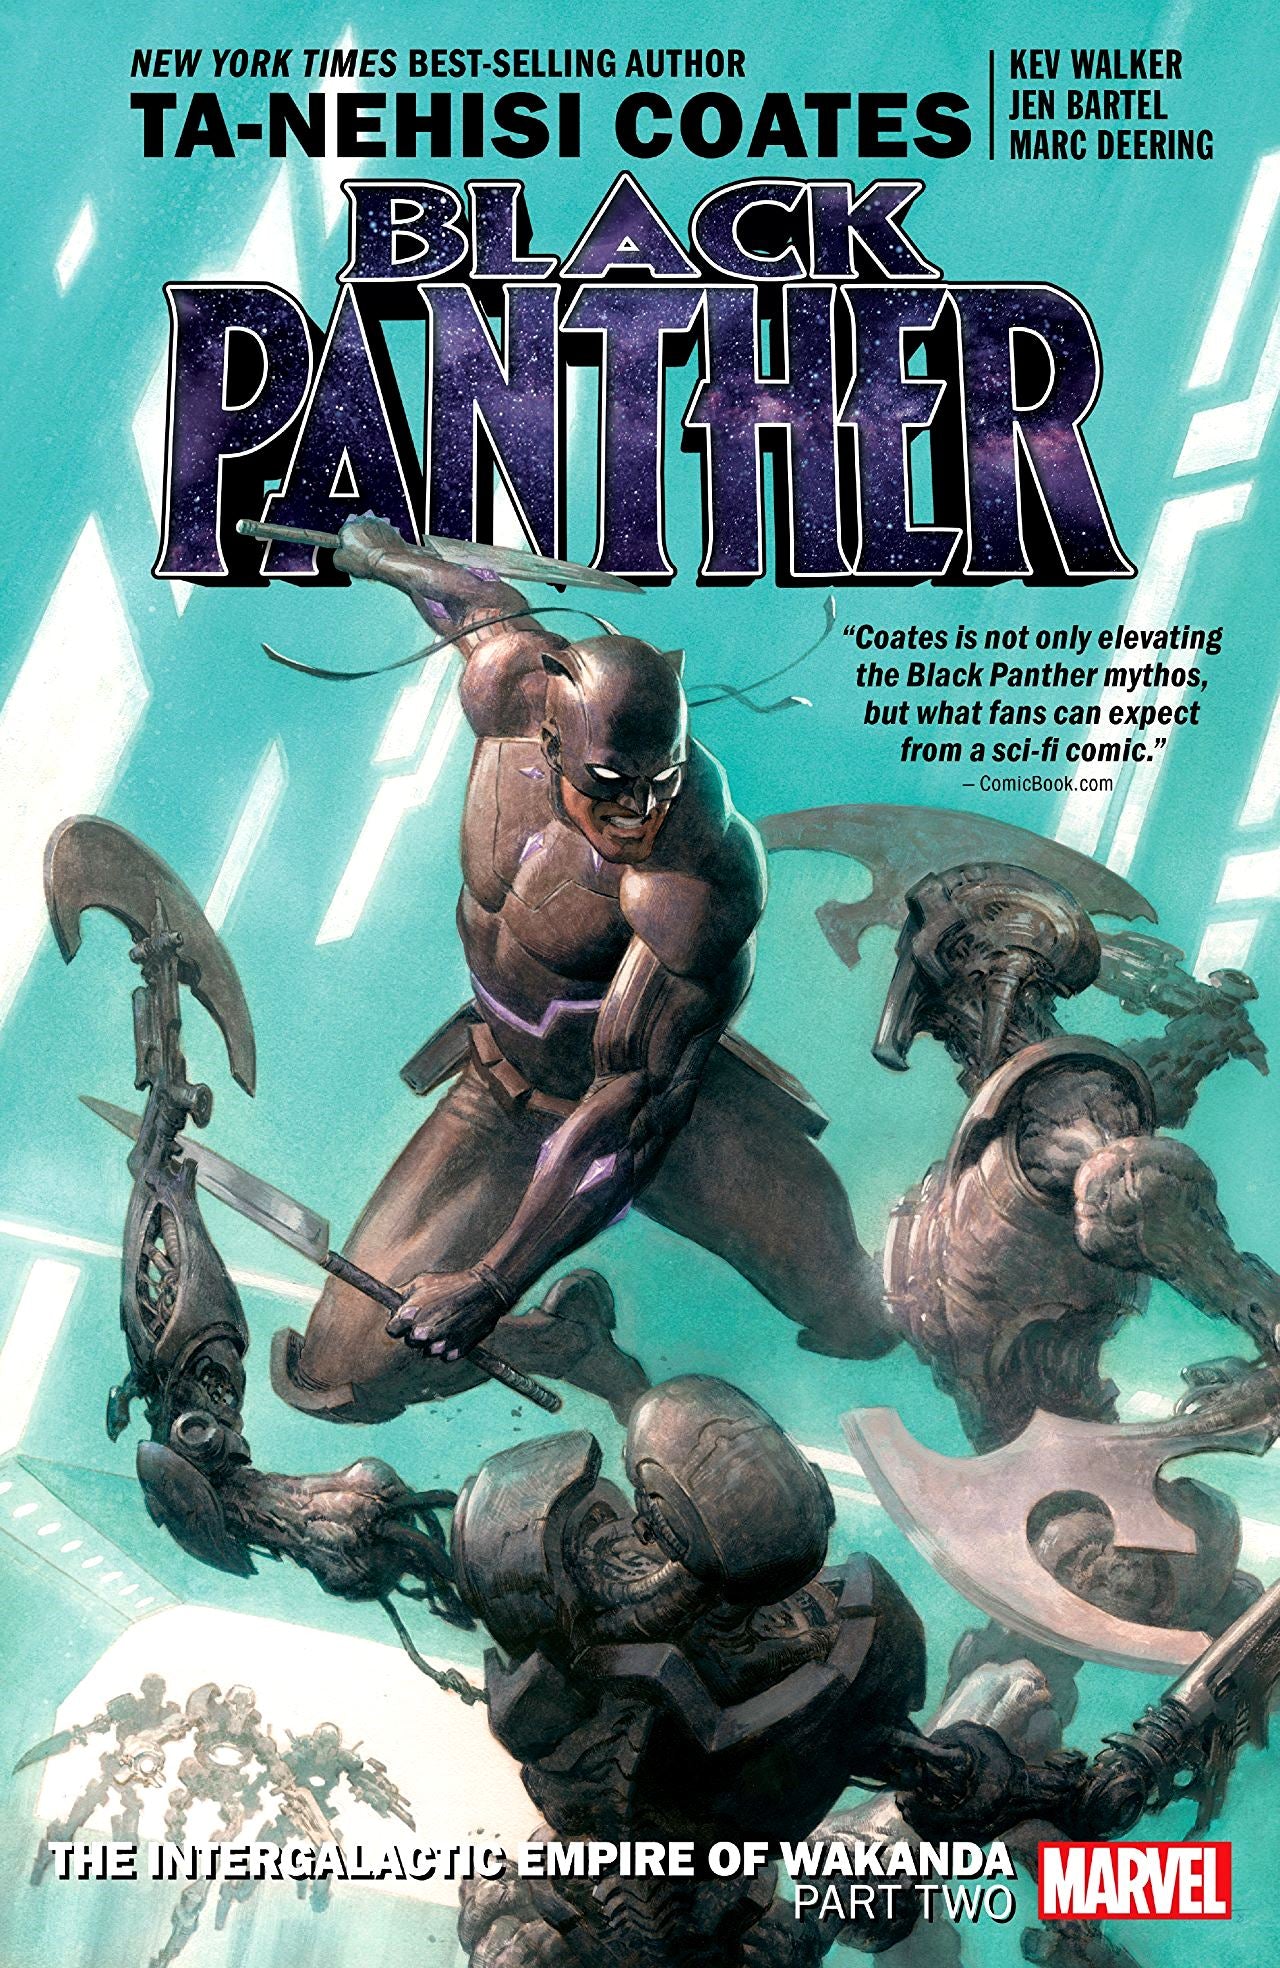 Black Panther (2016) Book 7: The Intergalactic Empire of Wakanda - Part Two